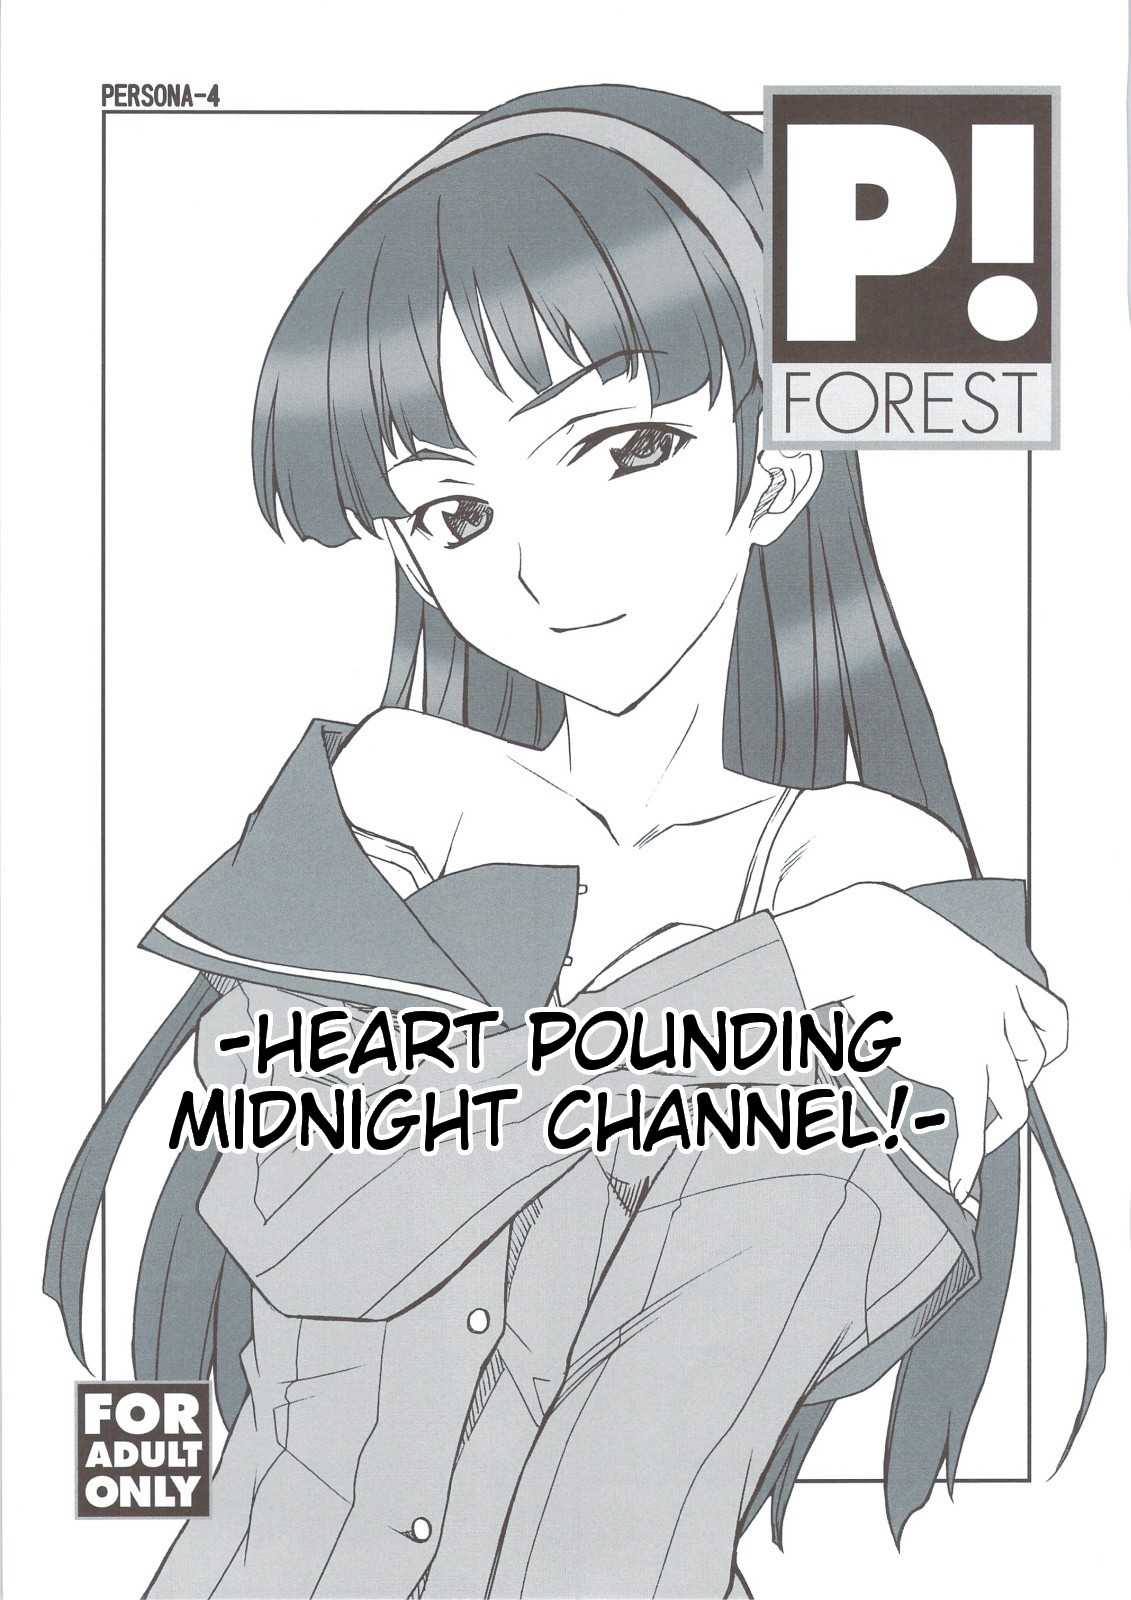 [P-FOREST] -Heart Pounding Midnight Channel!- (Persona 4)[Unc][Eng] 